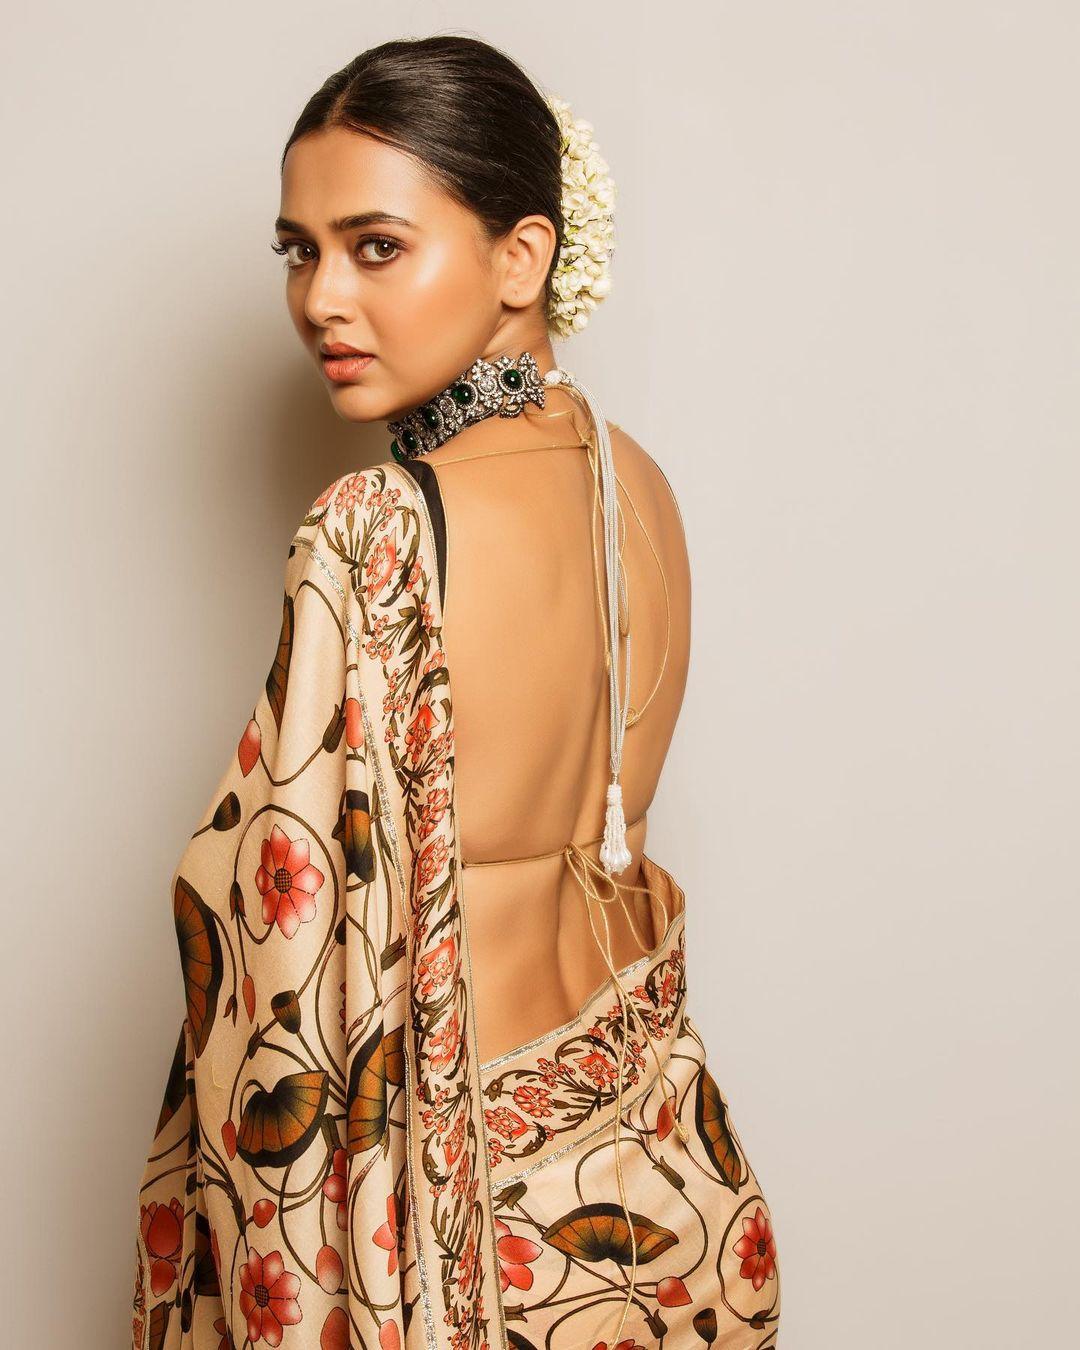 For this look, you need to get a heavily printed white saree, just like Tejasswi's saree. The actress's saree is printed with red and orange-coloured flowers, which makes it perfect for Pooja. After getting the saree, just like the actress, pair it with a contrasting backless blouse to strike a balance